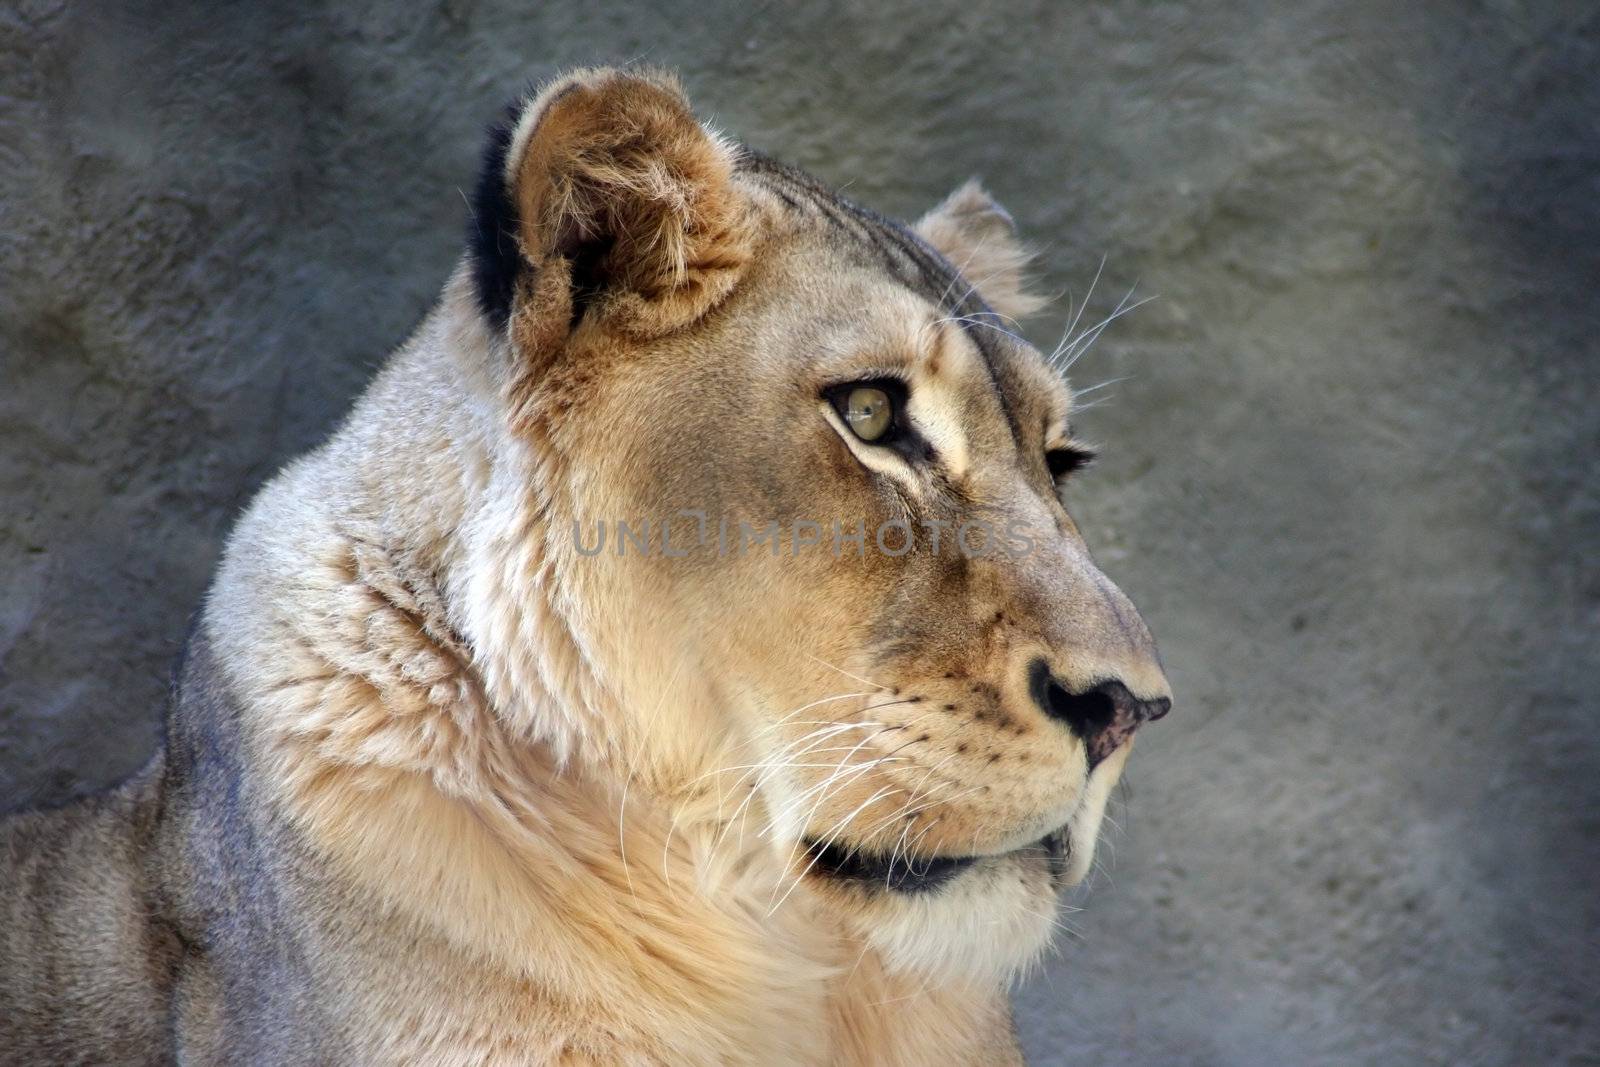 A shot of a female lion at the zoo.